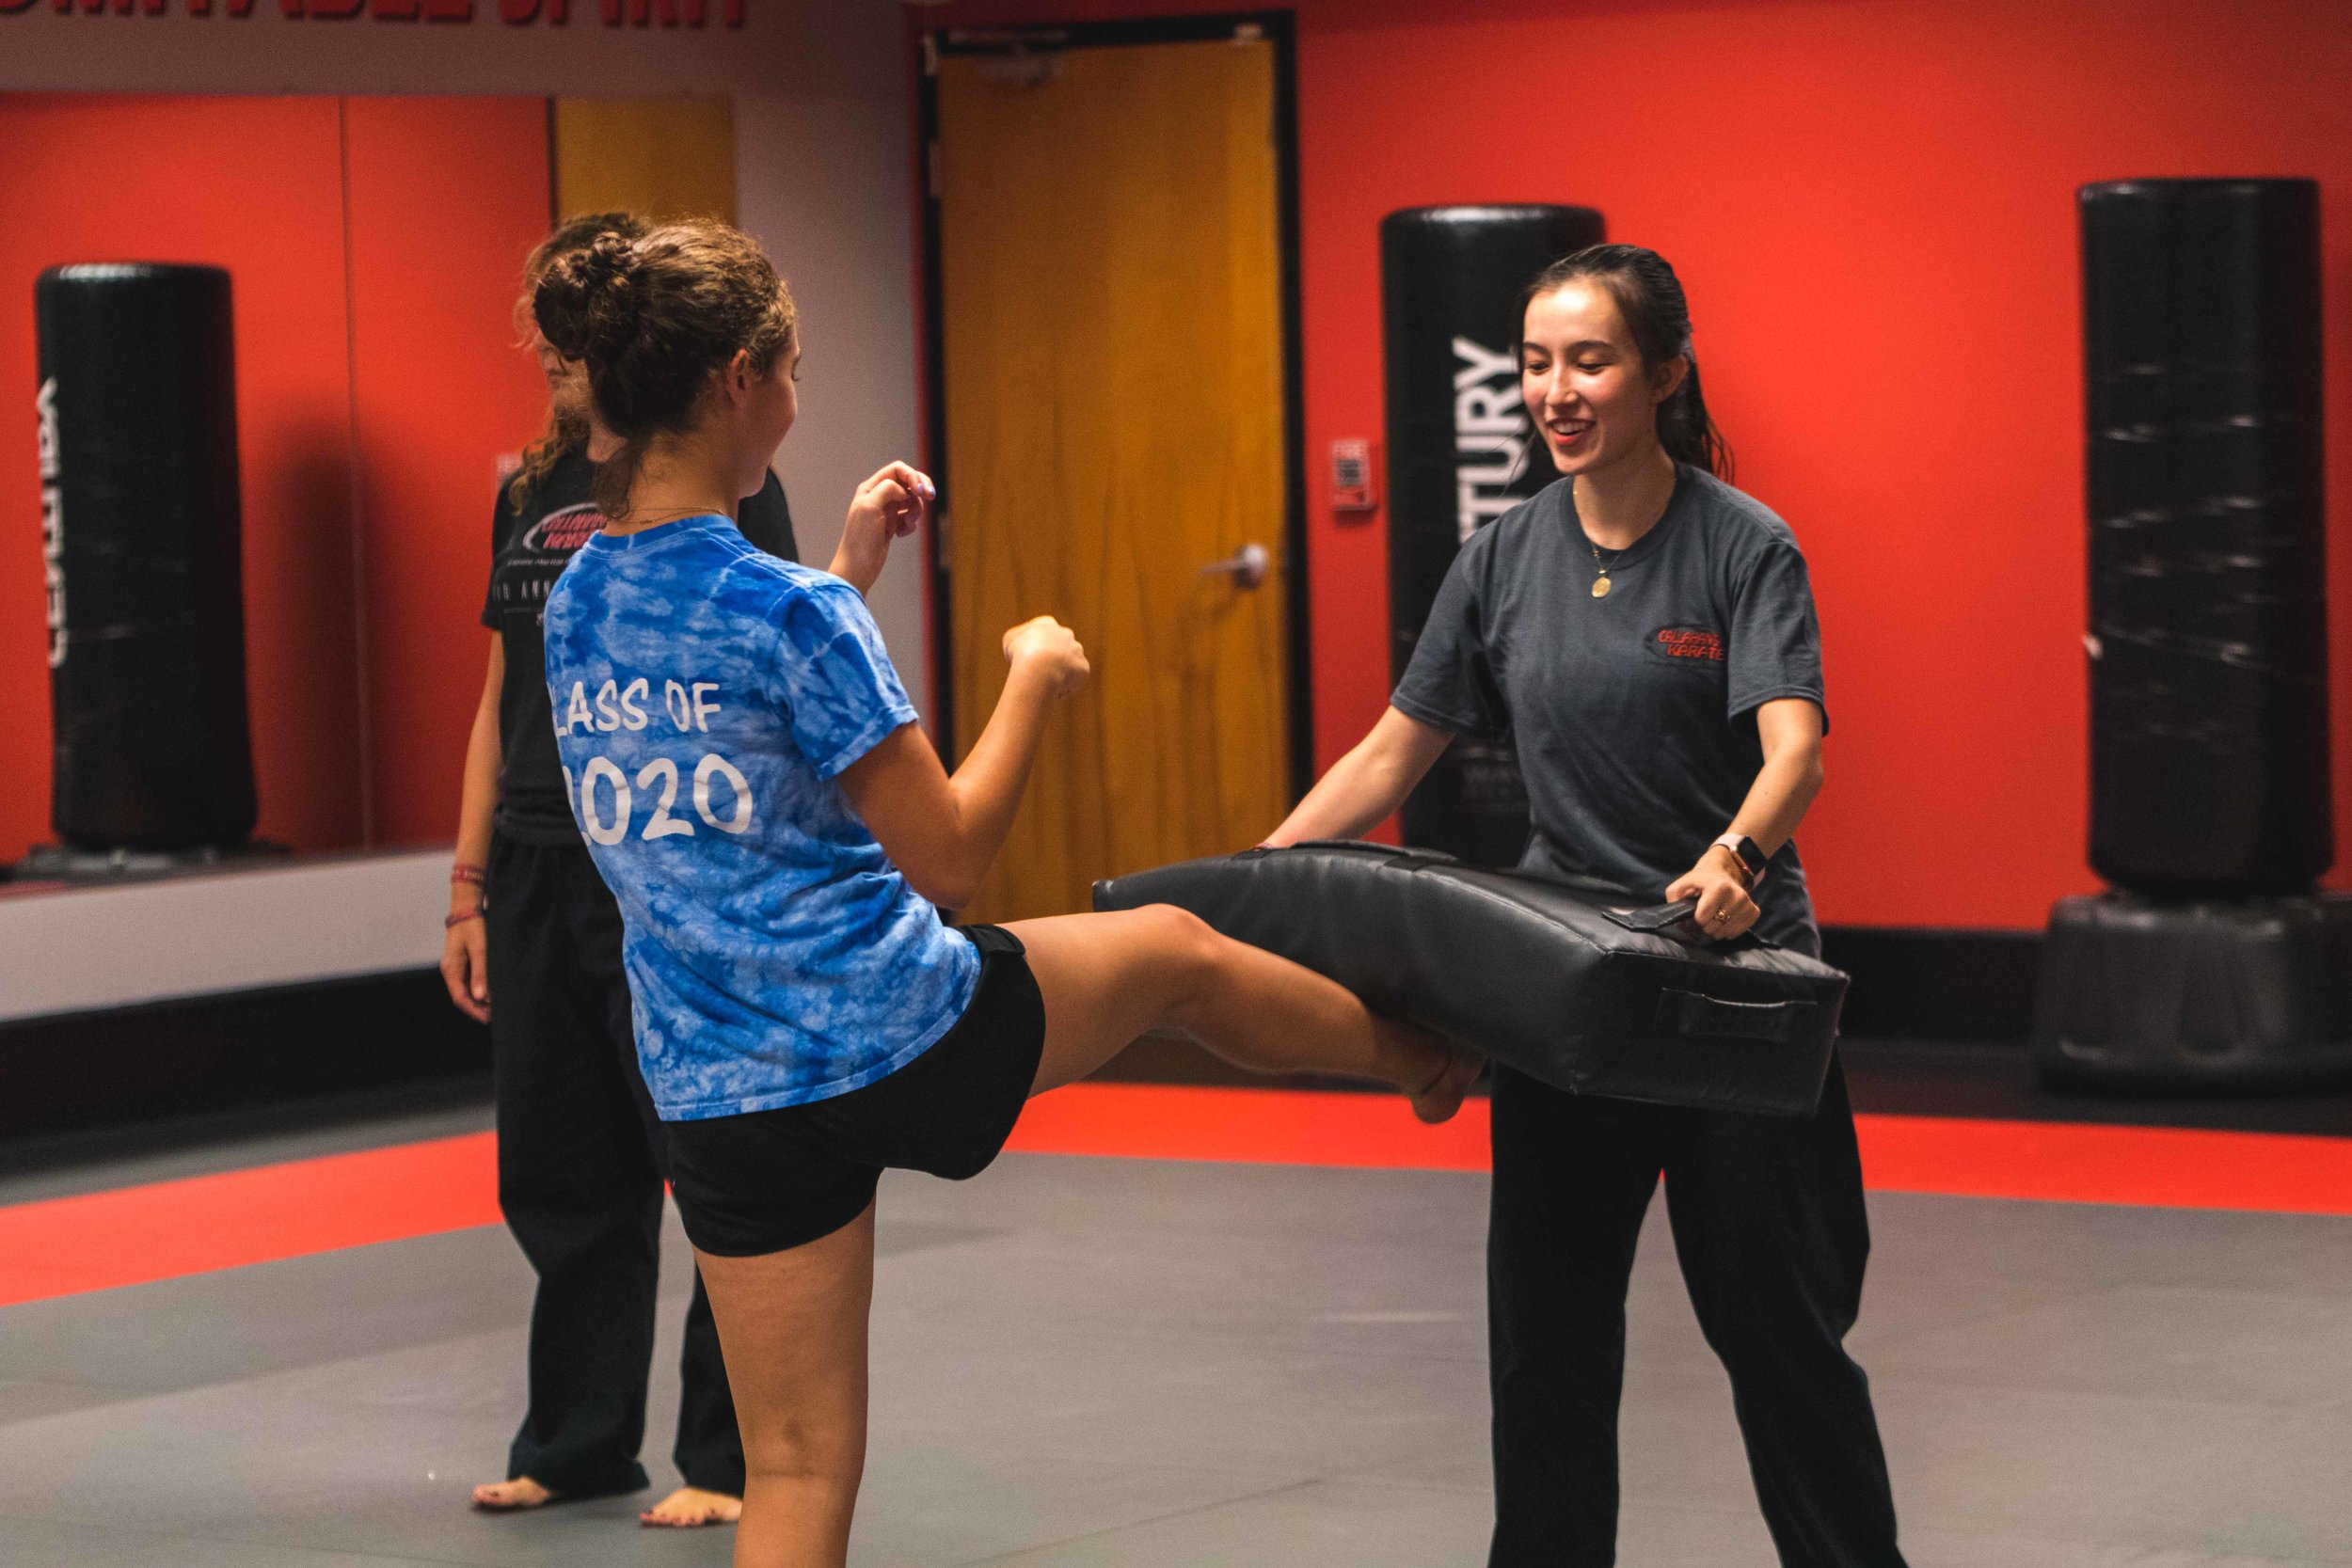 Teenage Martial Arts Classes for Girls and Boys in Bedford Massachusetts at Callahan's Karate 1.jpg